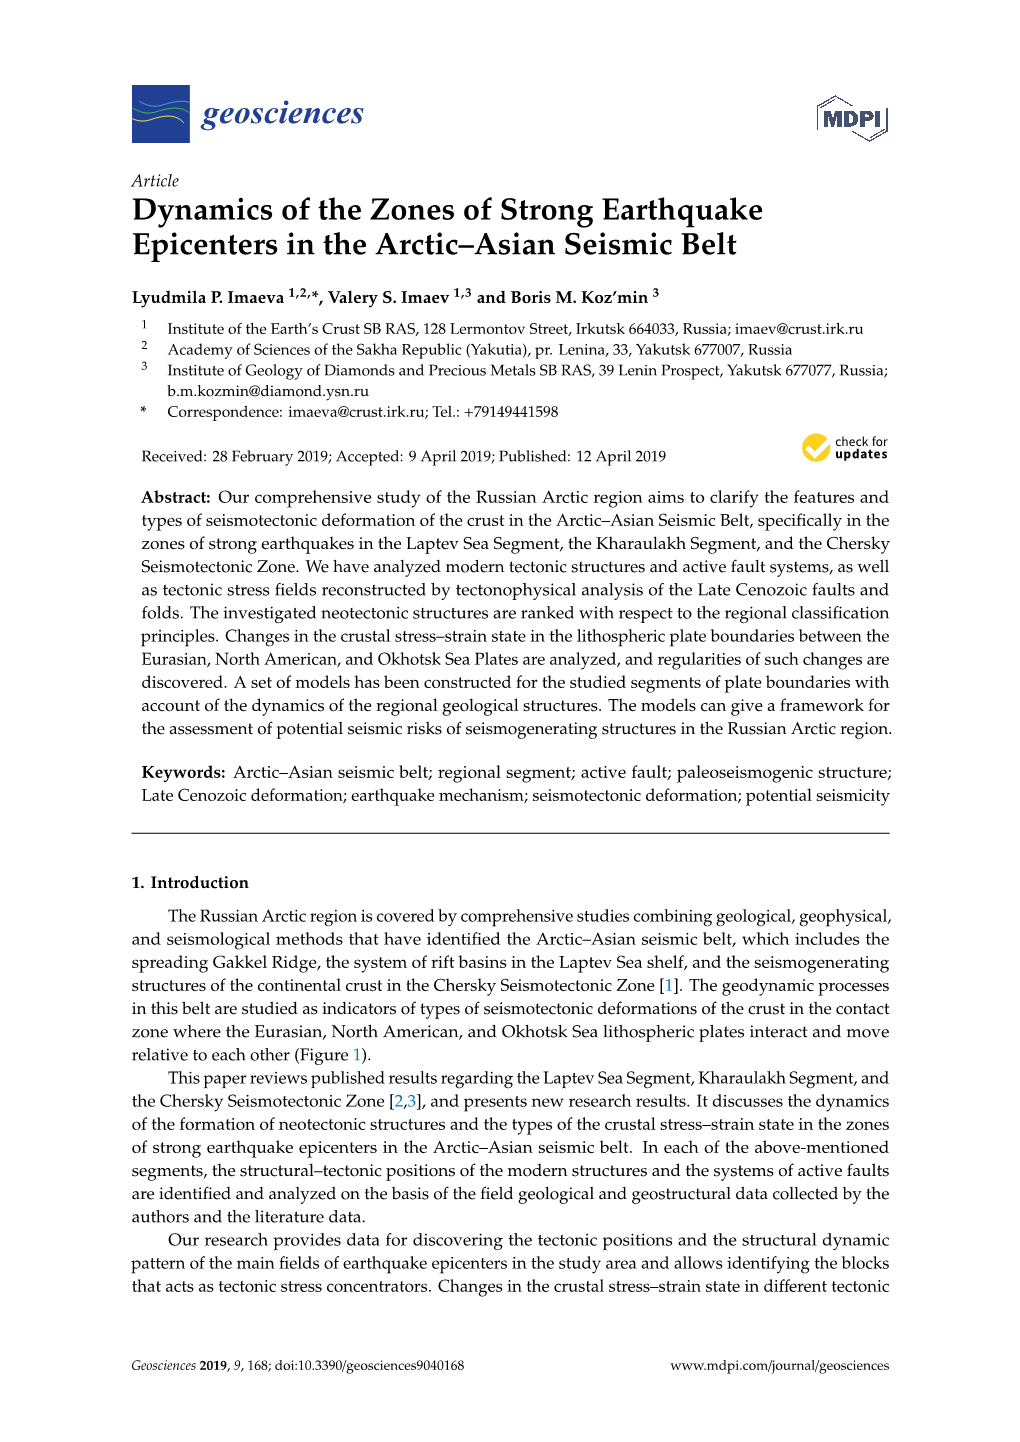 Dynamics of the Zones of Strong Earthquake Epicenters in the Arctic–Asian Seismic Belt